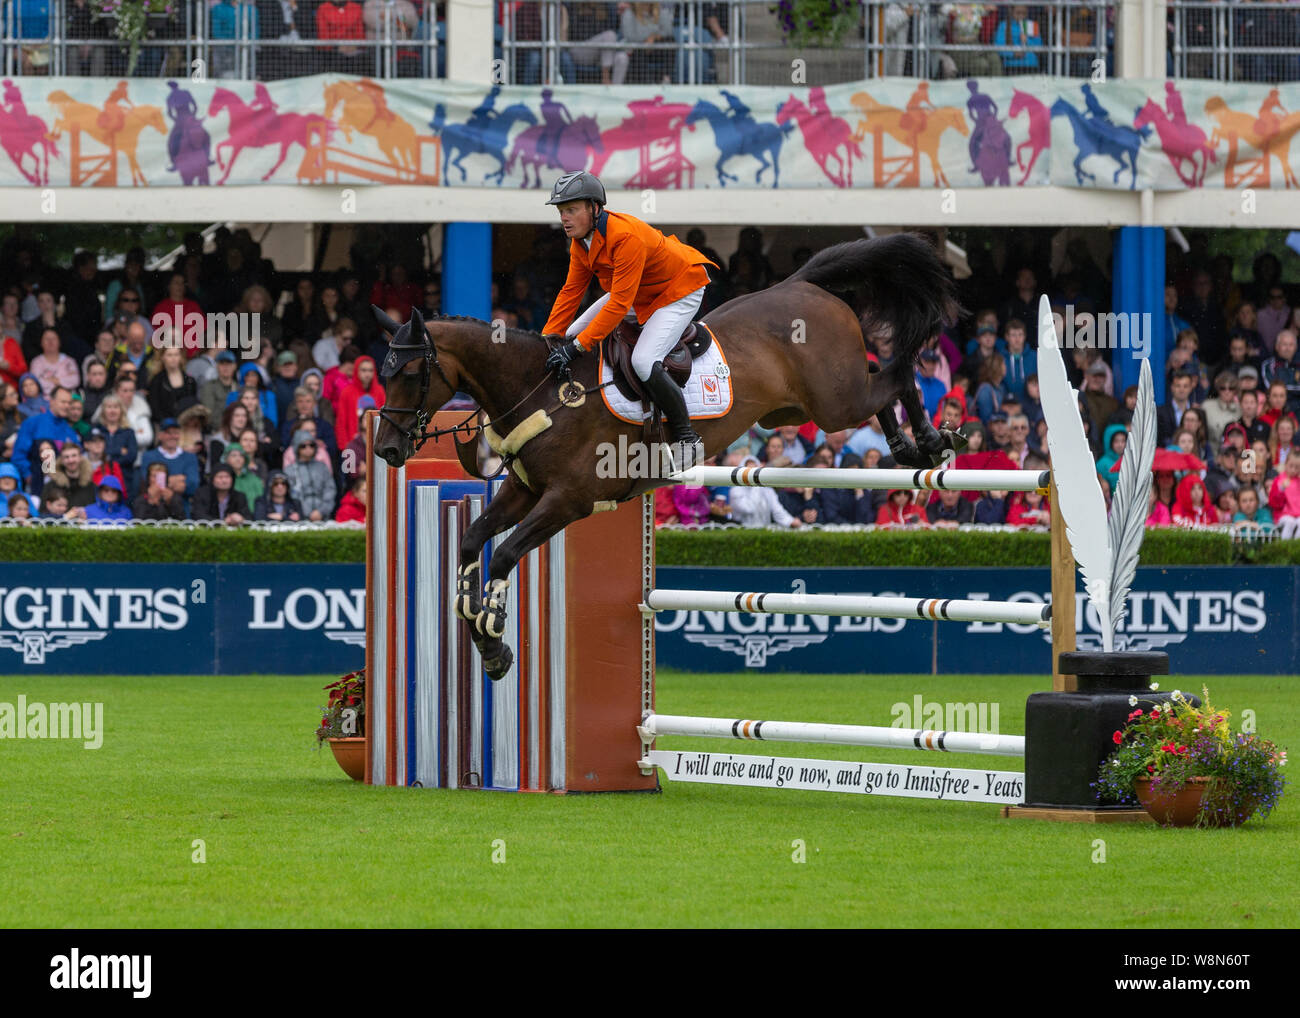 Dublin, Ireland 09 august 2019. Willem Greve for Team Netherlands compete for the Aga Khan Cup in the Longines Nations Cup Show Jumping at the RDS Dublin Horse Show. Credit: John Rymer/Alamy Live News Stock Photo